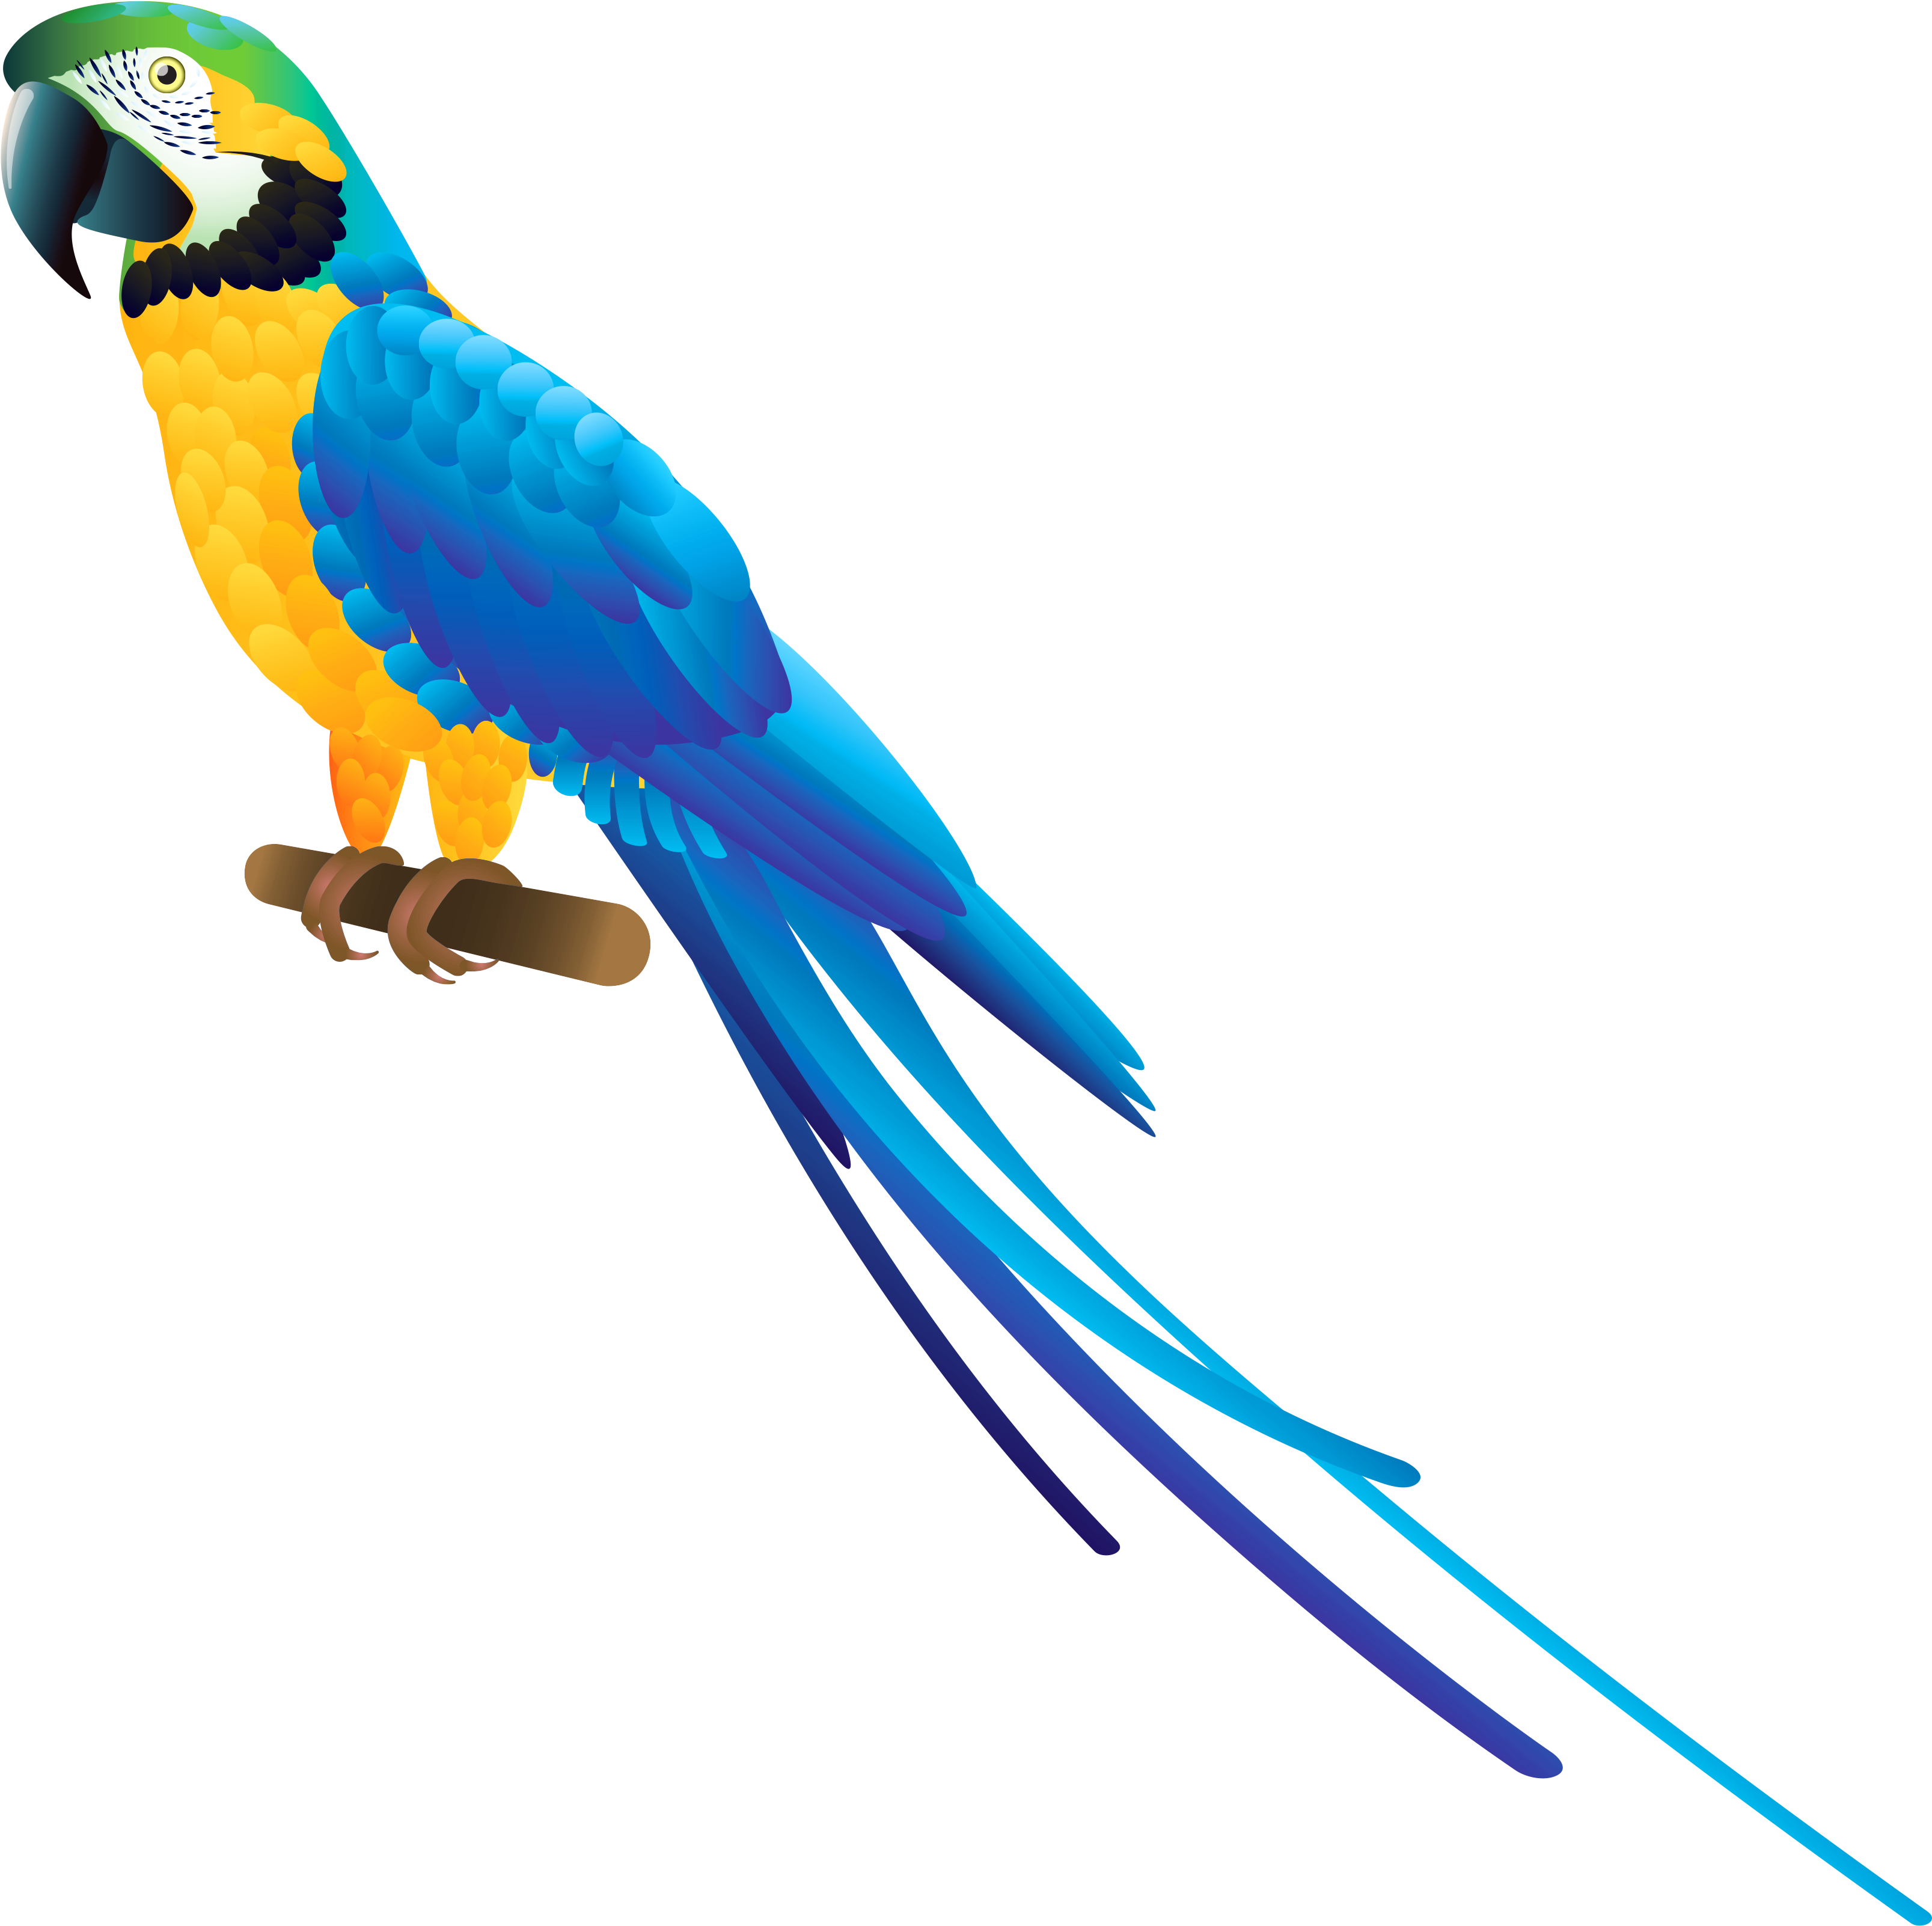 Blue And Yellow Macaw PNG Image File